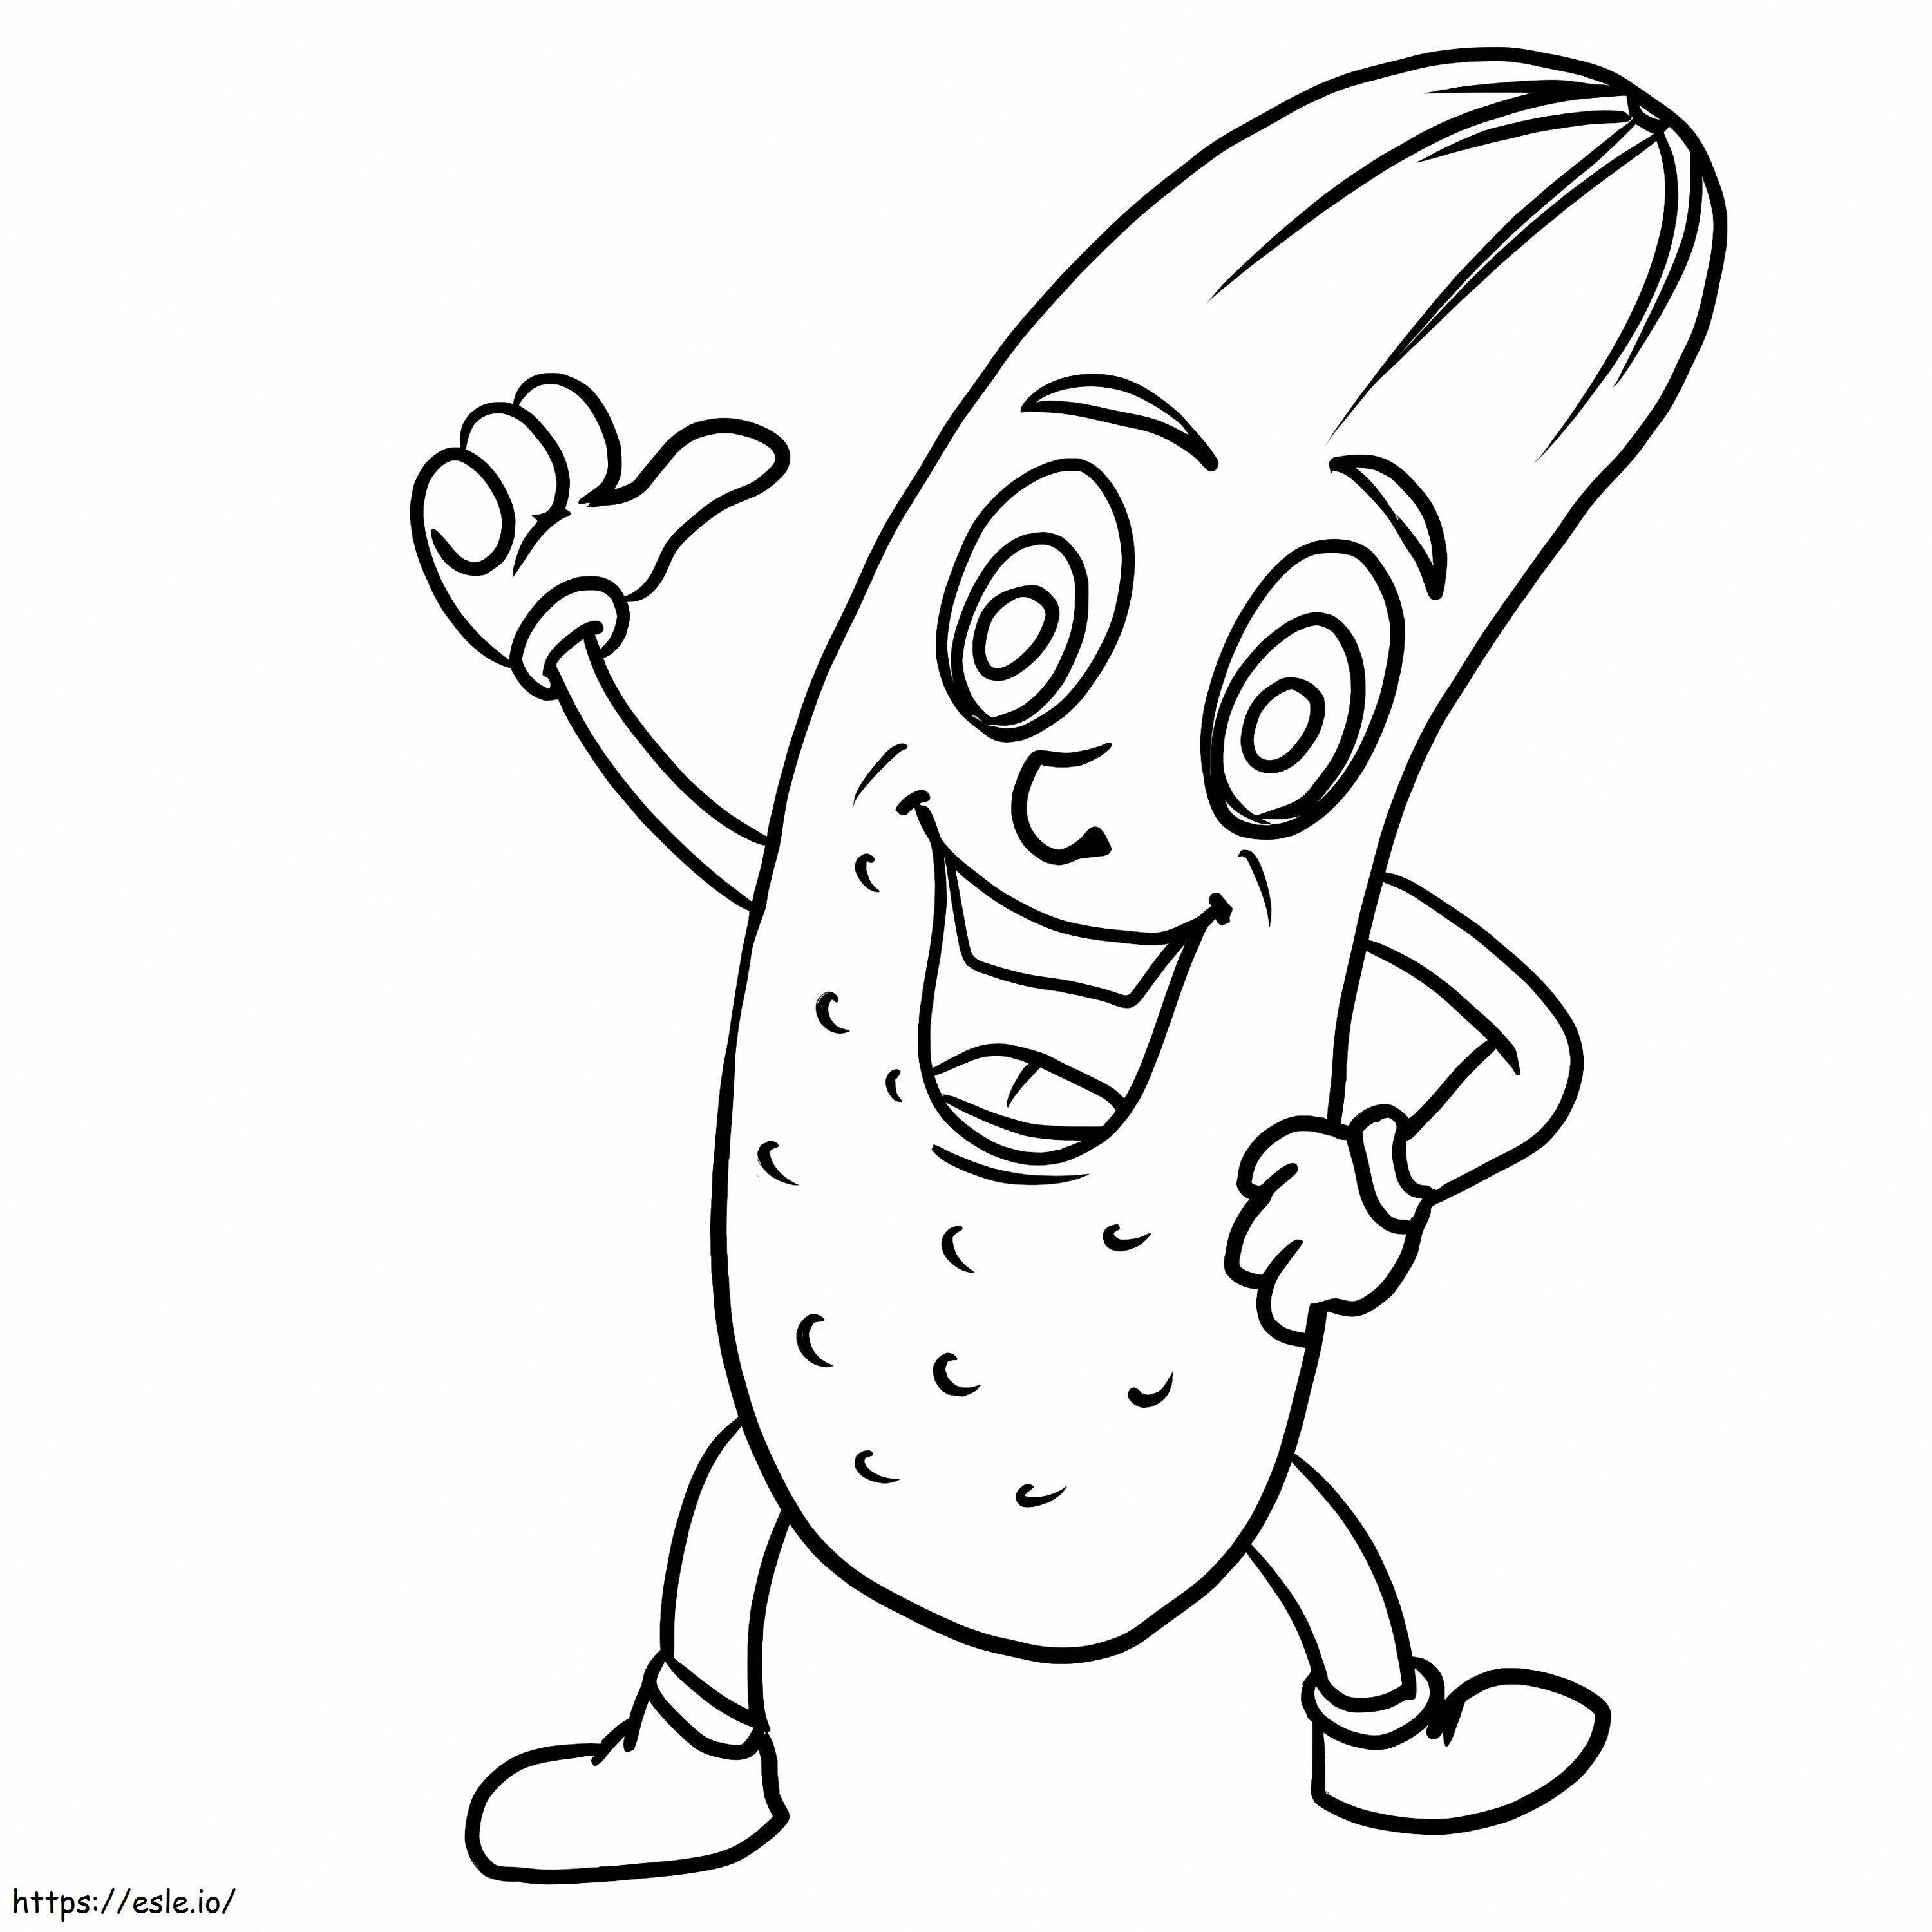 Funny Cucumber coloring page